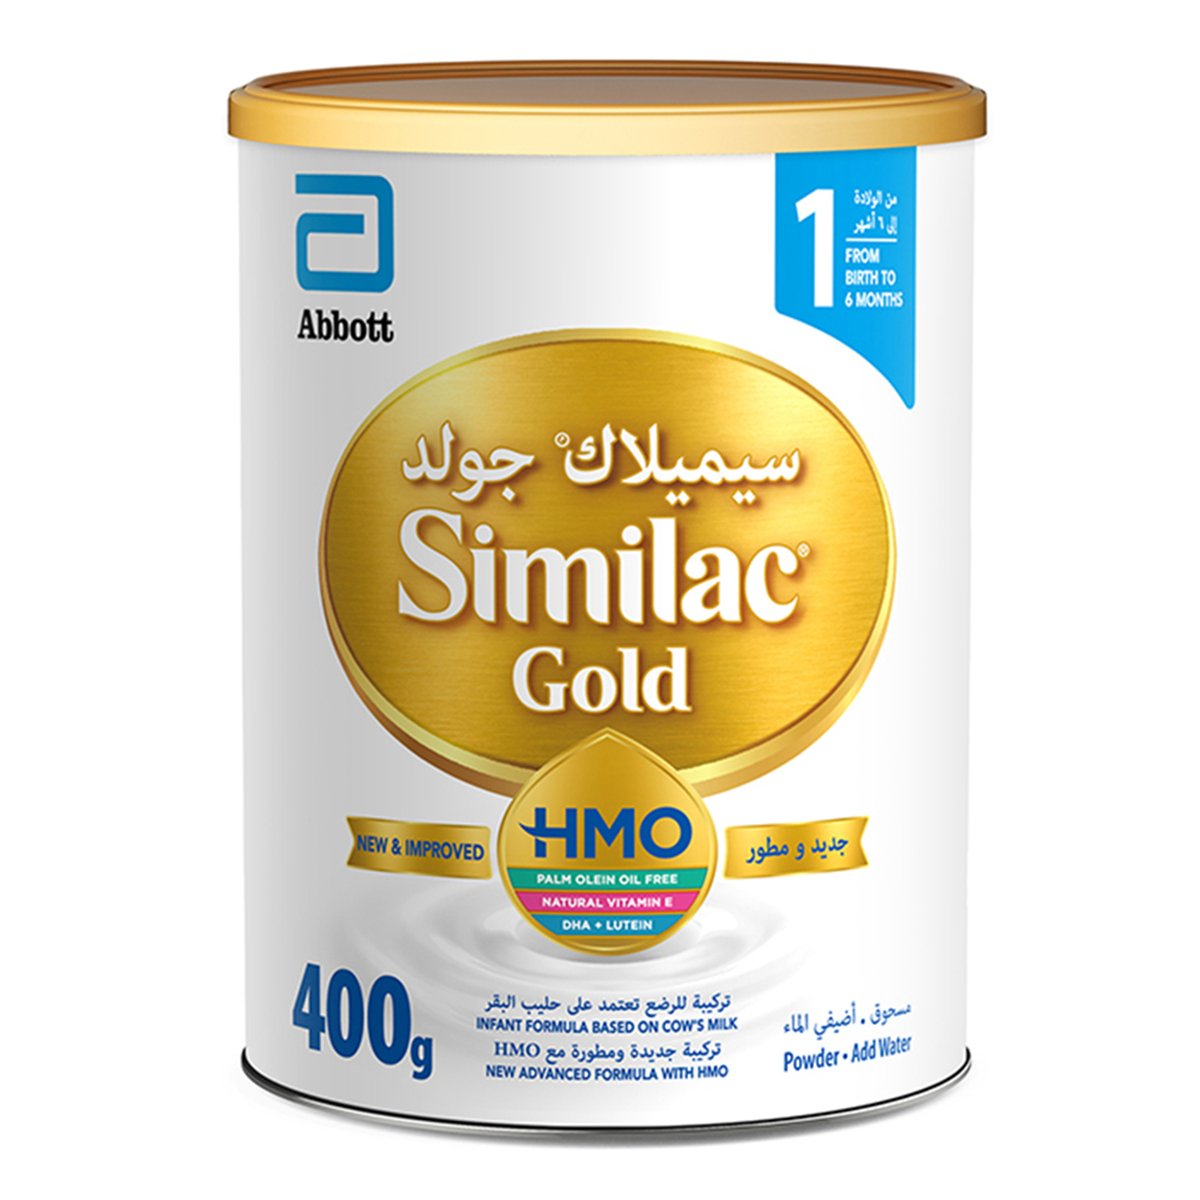 Buy Similac Gold New Advanced Infant Formula With HMO Stage 1 From 0-6 Months 400 g Online at Best Price | Baby milk powders & formula | Lulu KSA in Kuwait